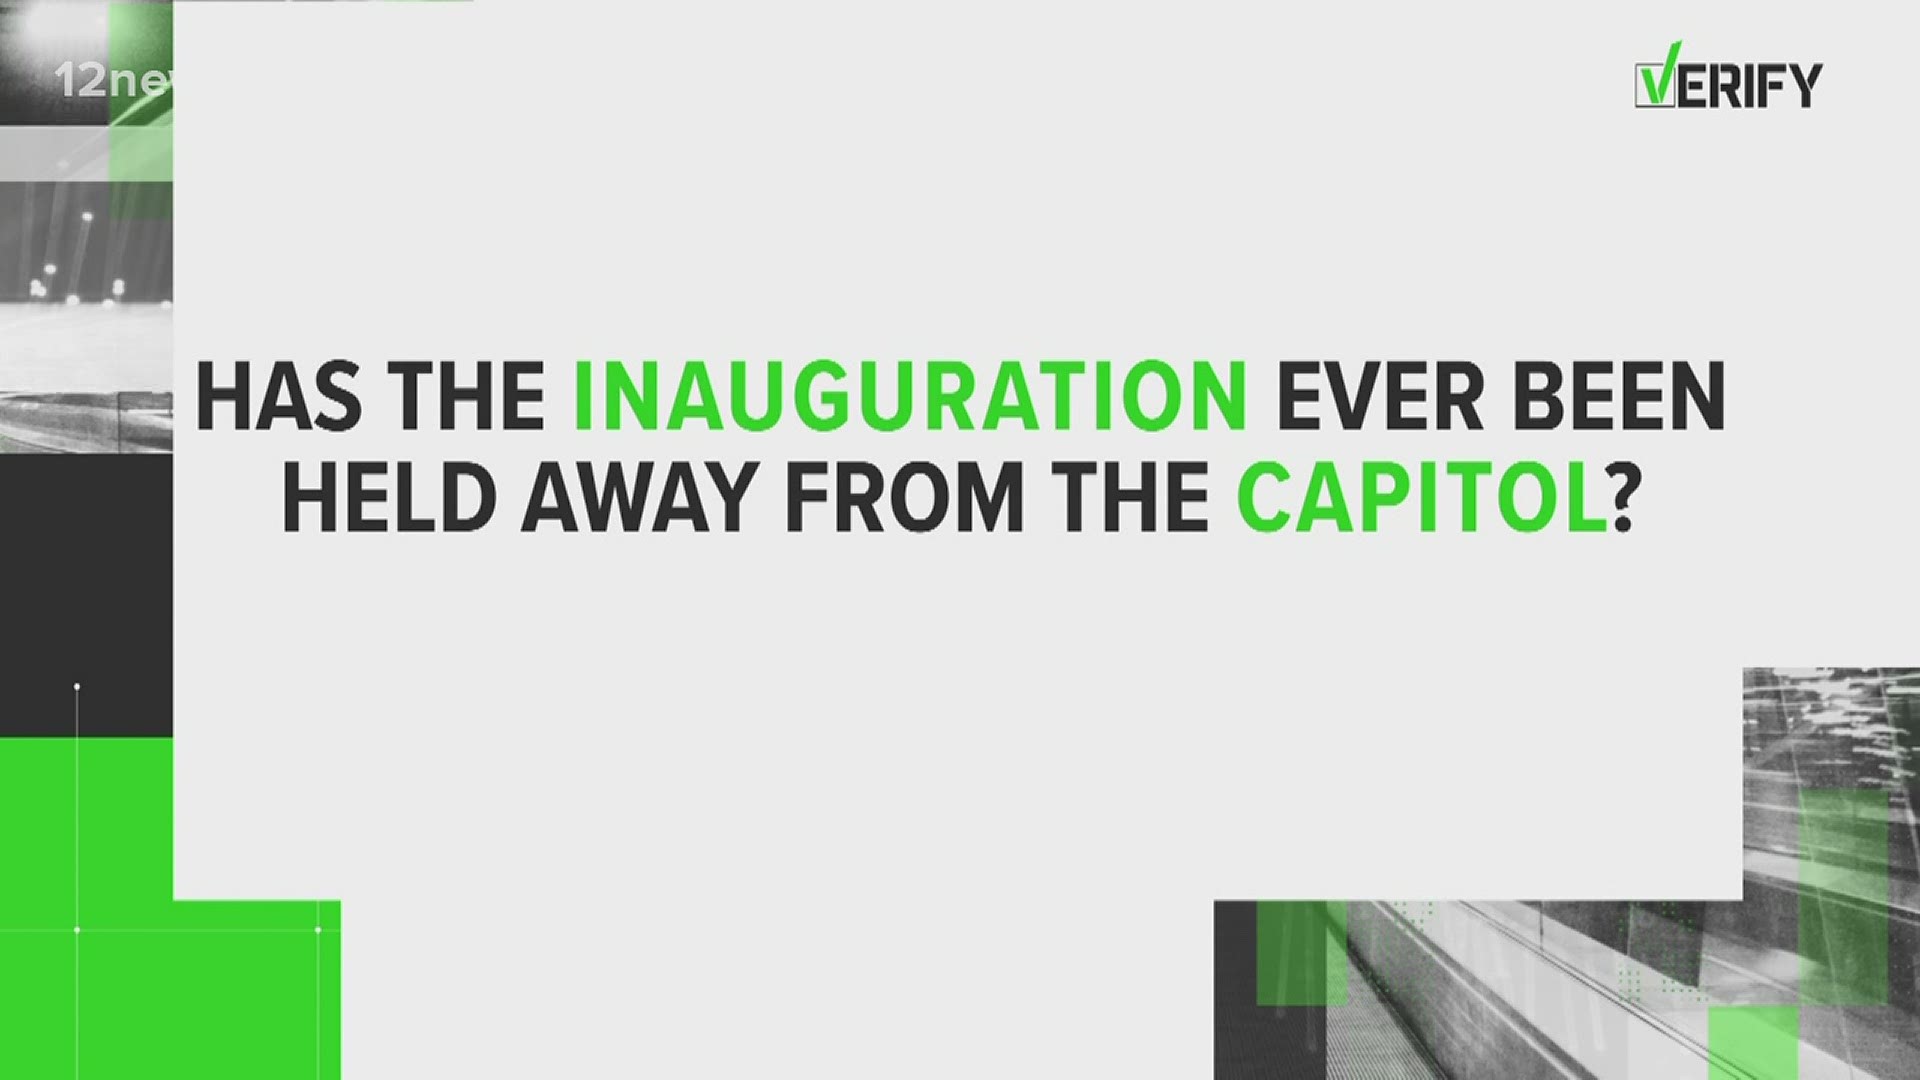 Safety is a top-of-mind concern for the 2021 presidential inauguration after the attack on the Capitol last week. There are a lot of questions about security.